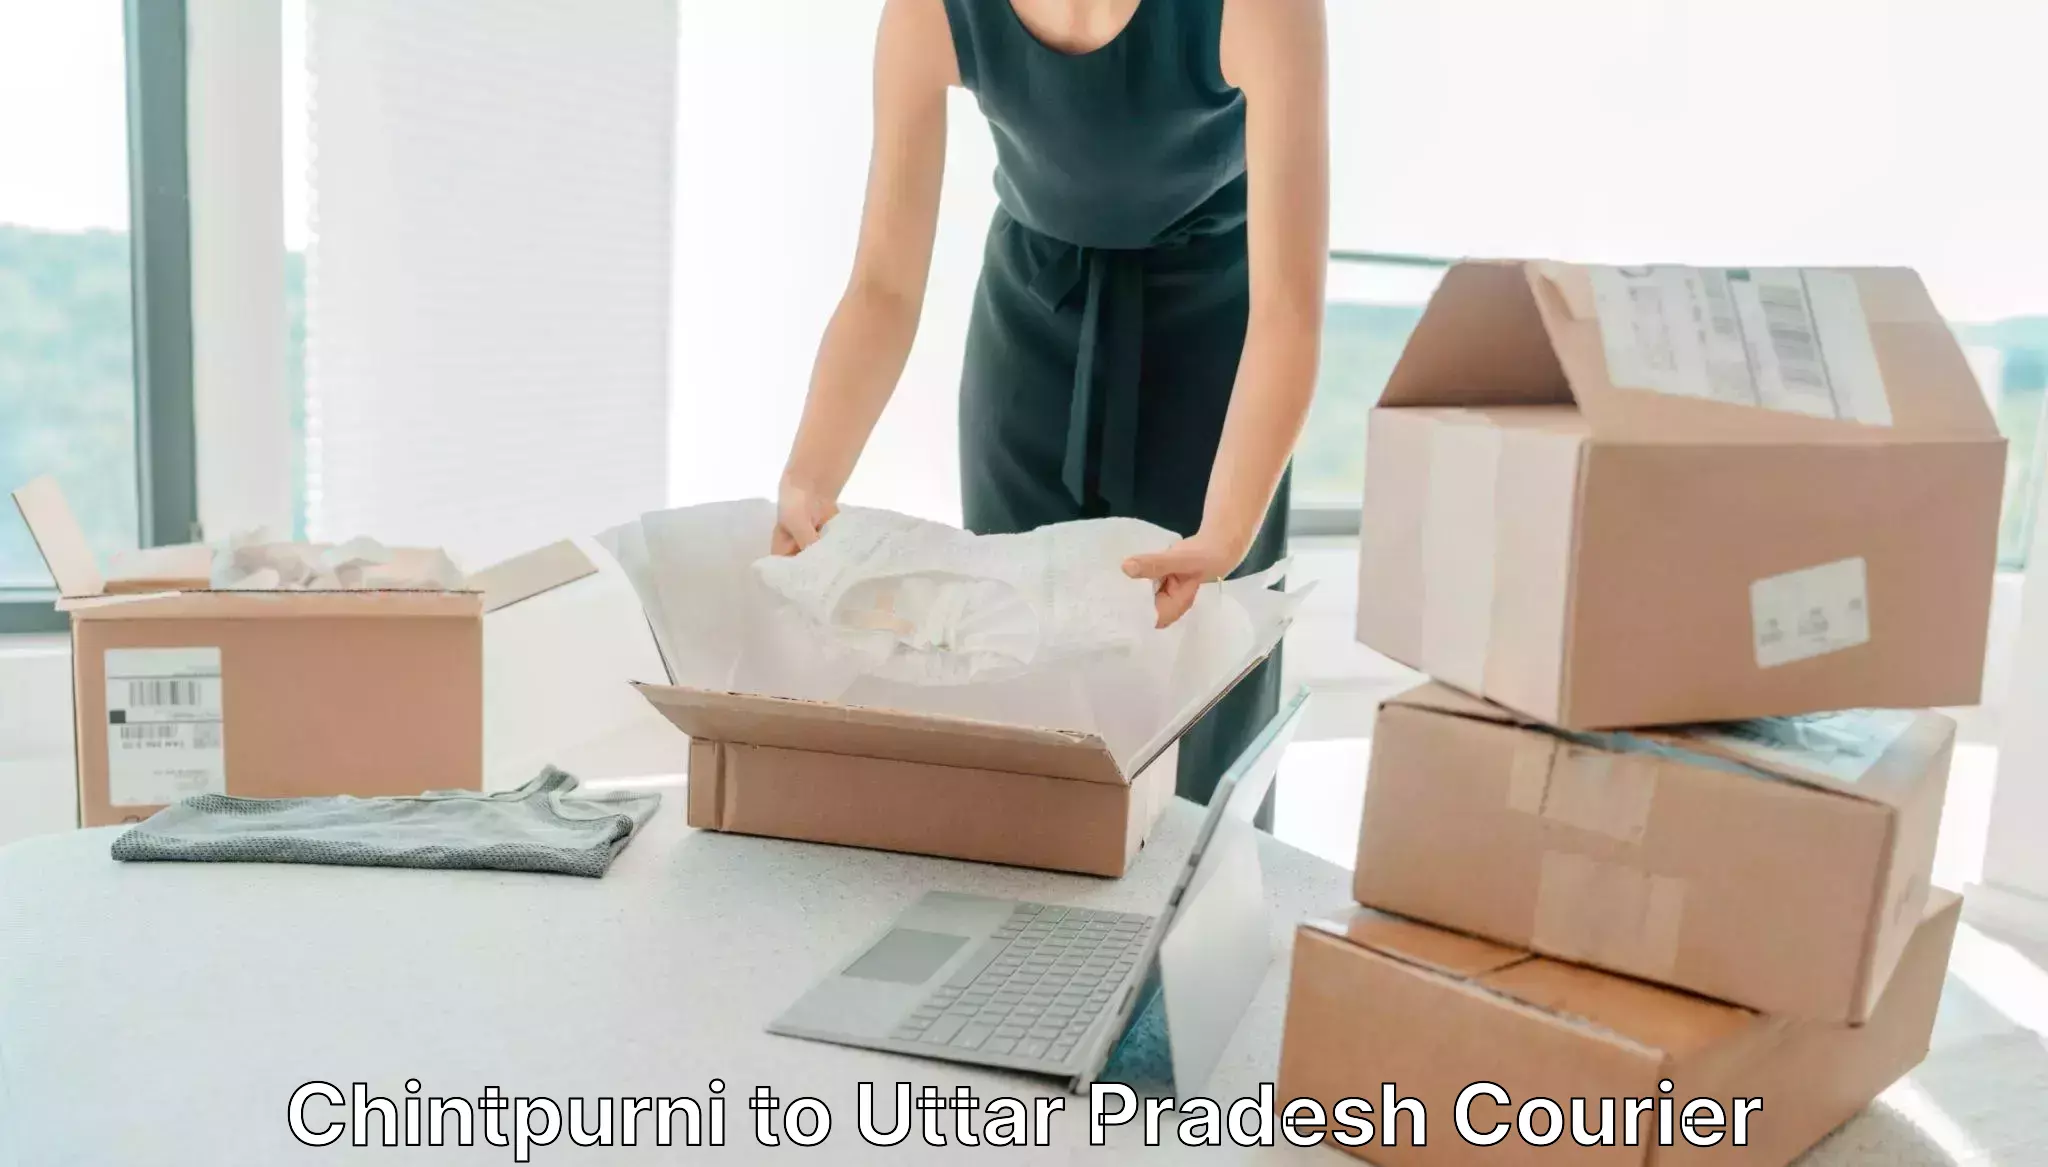 Bulk courier orders Chintpurni to Agra